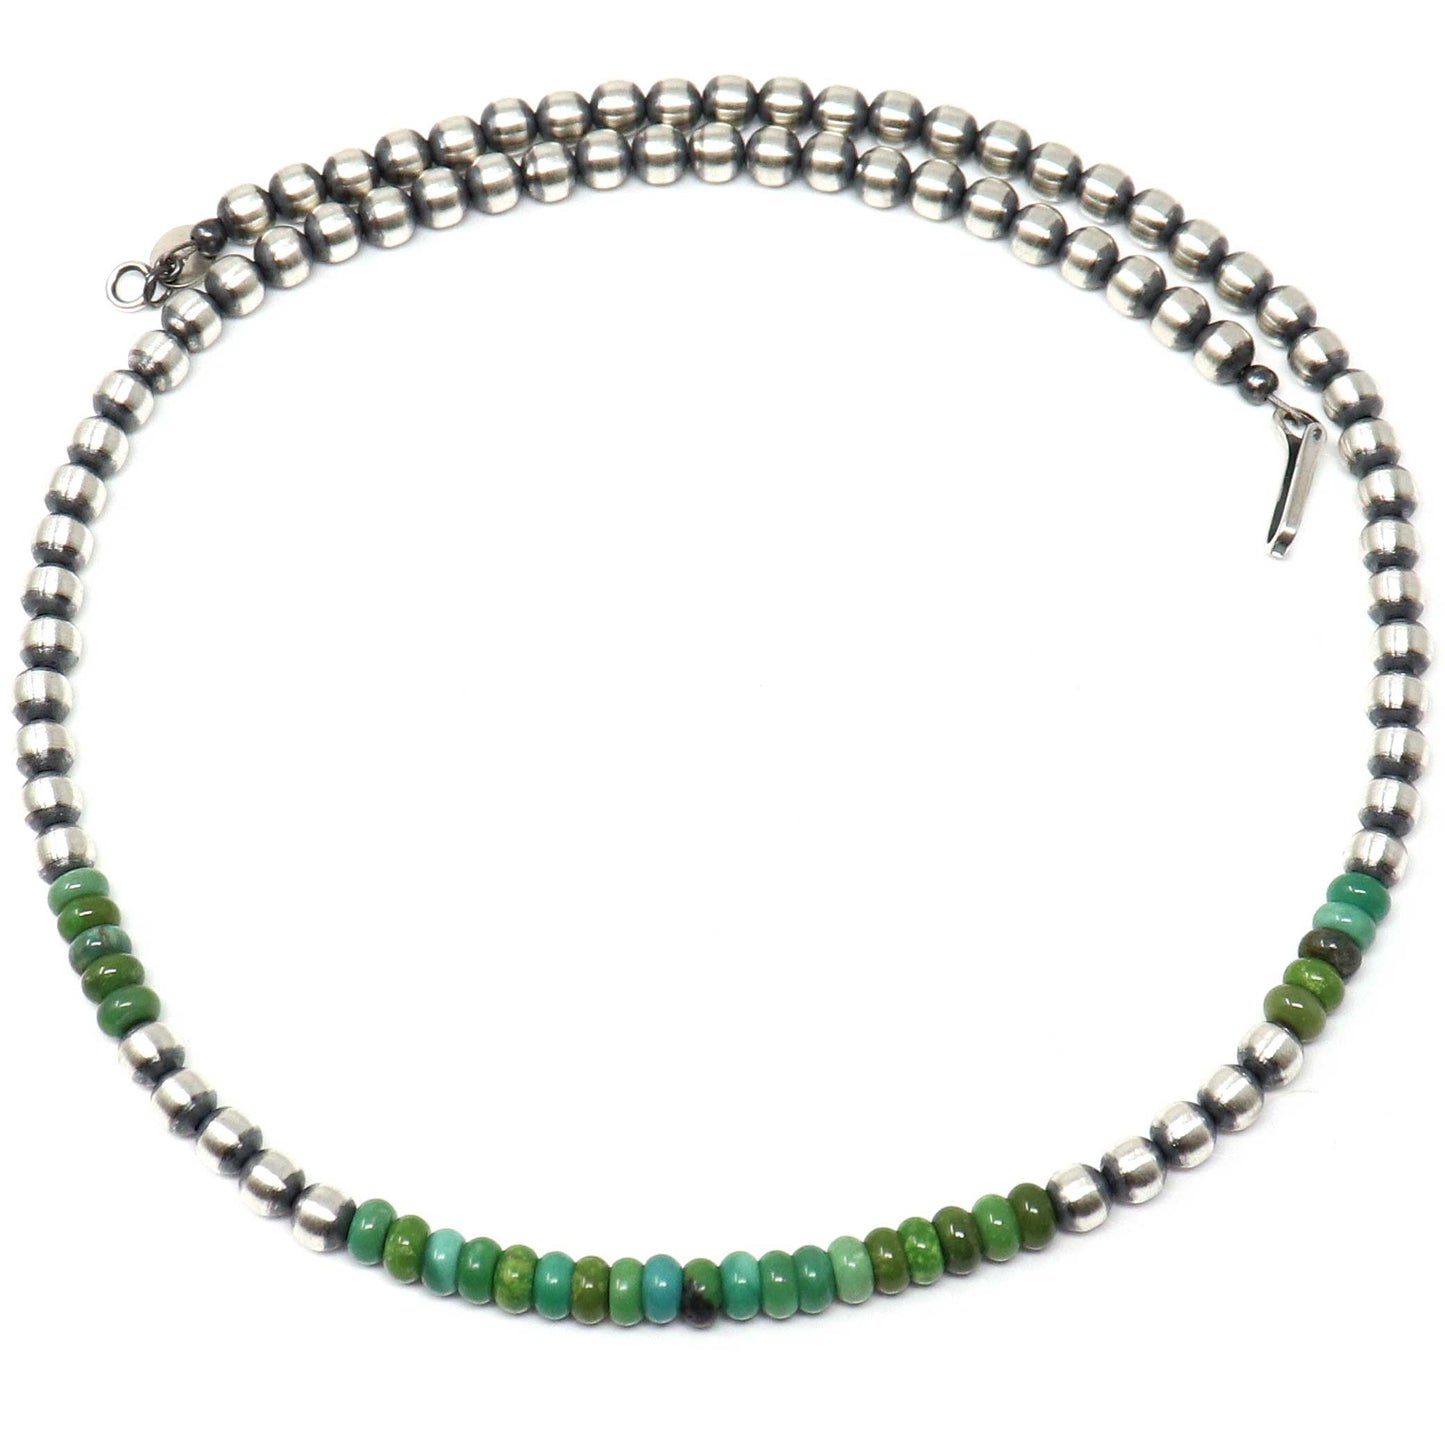 18" 5 mm Sterling Silver Navaho Pearls With Turquoise